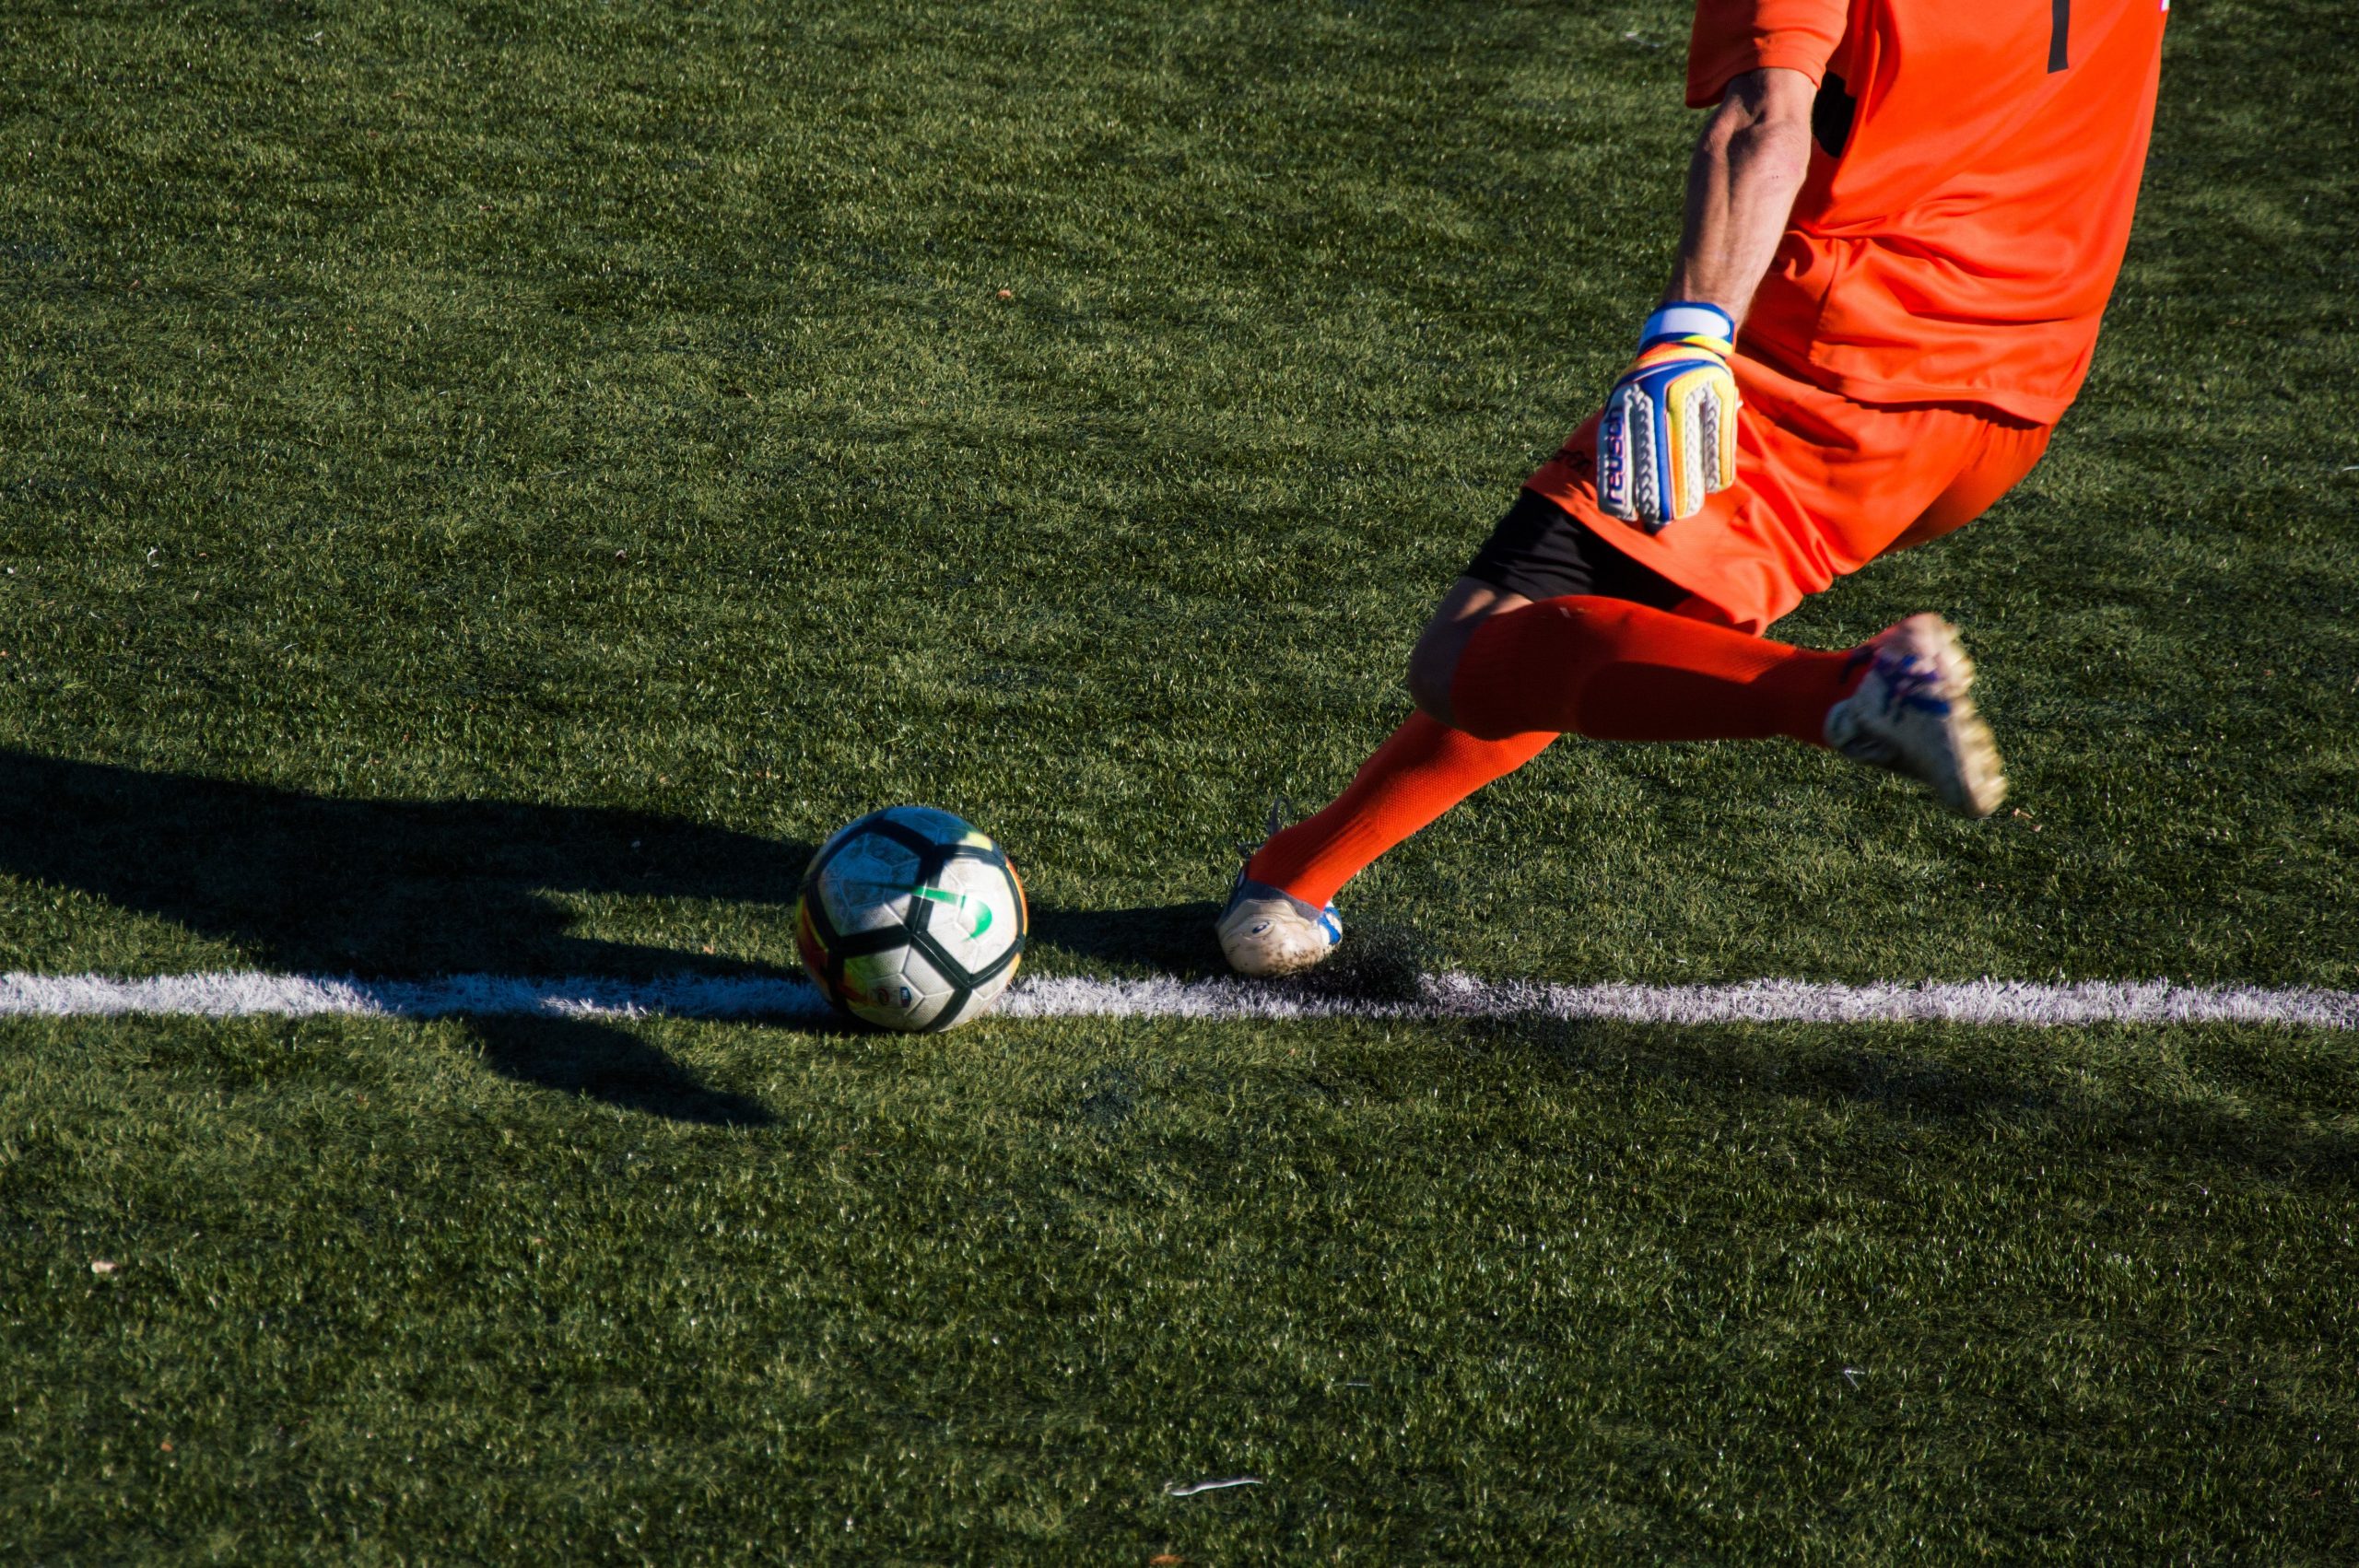 12-year-old boy born without forearm is now star goalkeeper of a football team